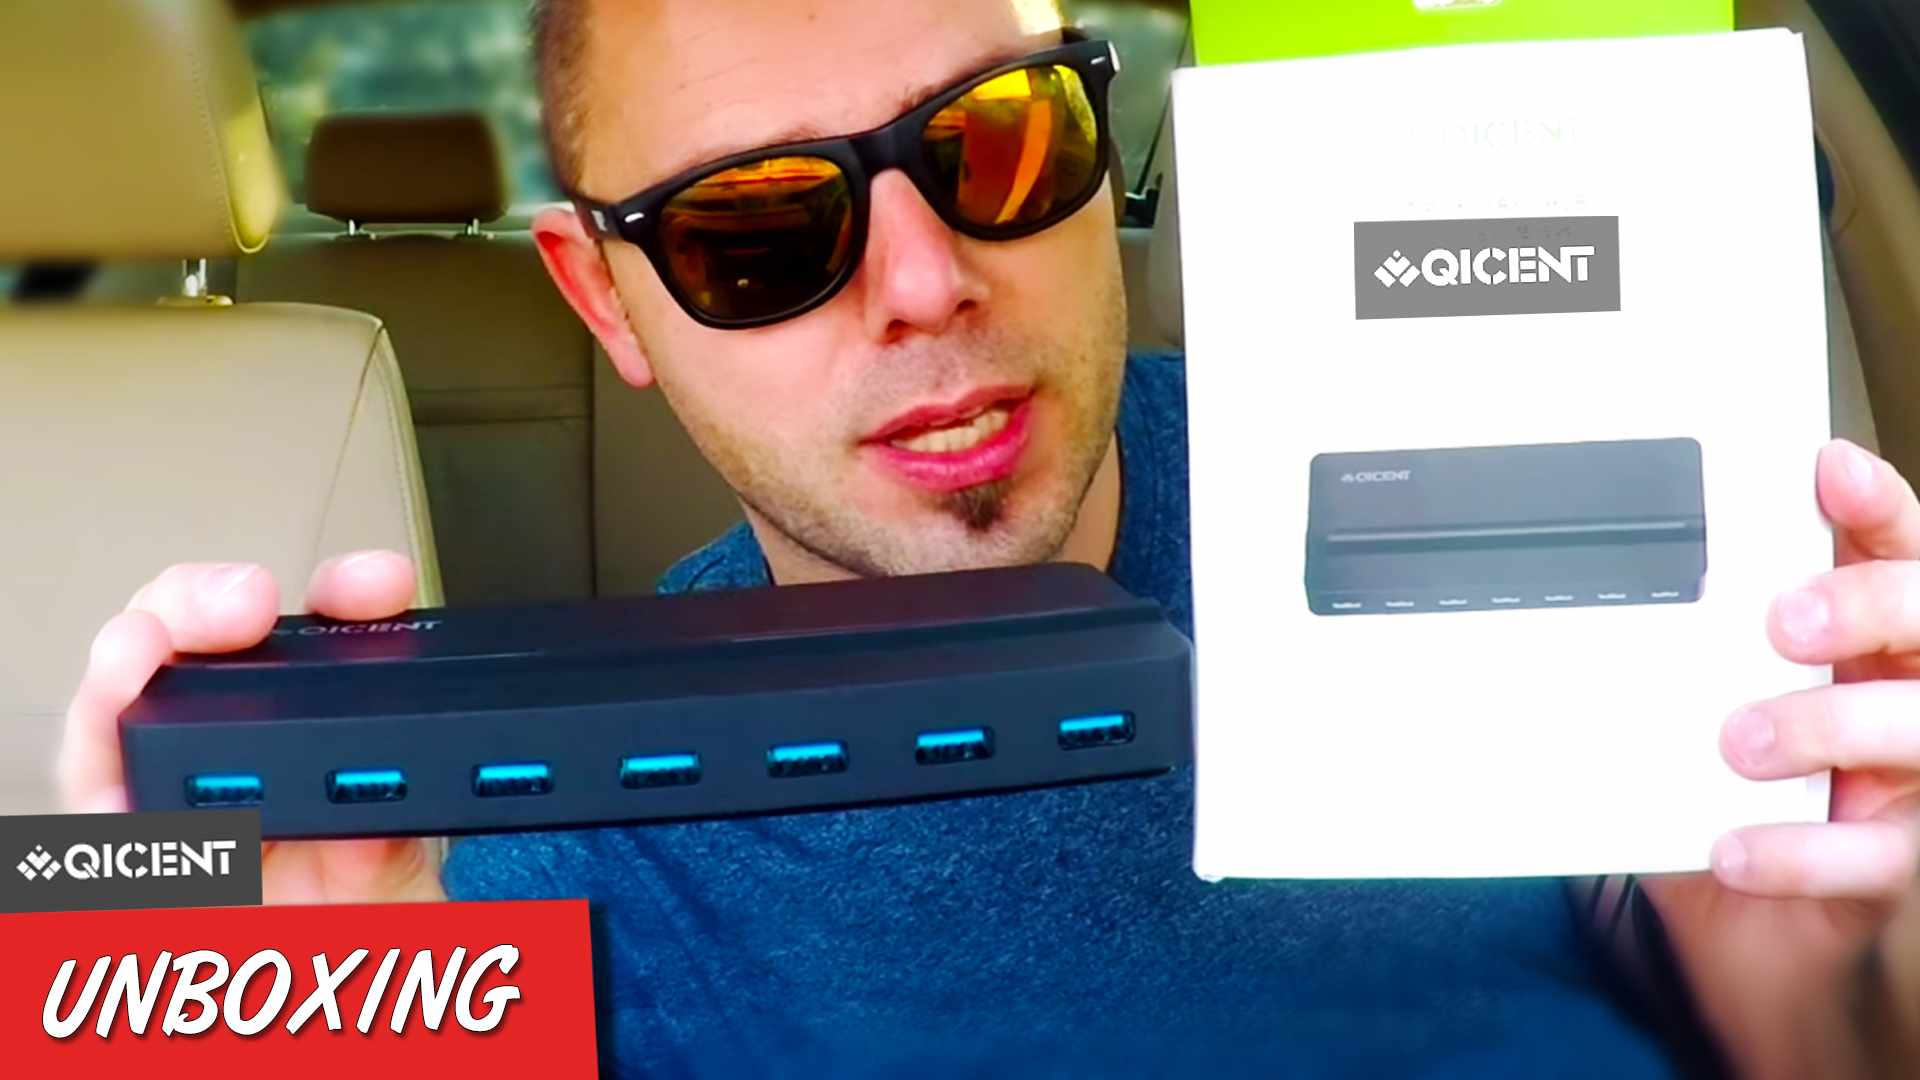 Most Useful Product Ever - QICENT 7 Port USB 3.0 HUB (QIC H7P) Unboxing & Review